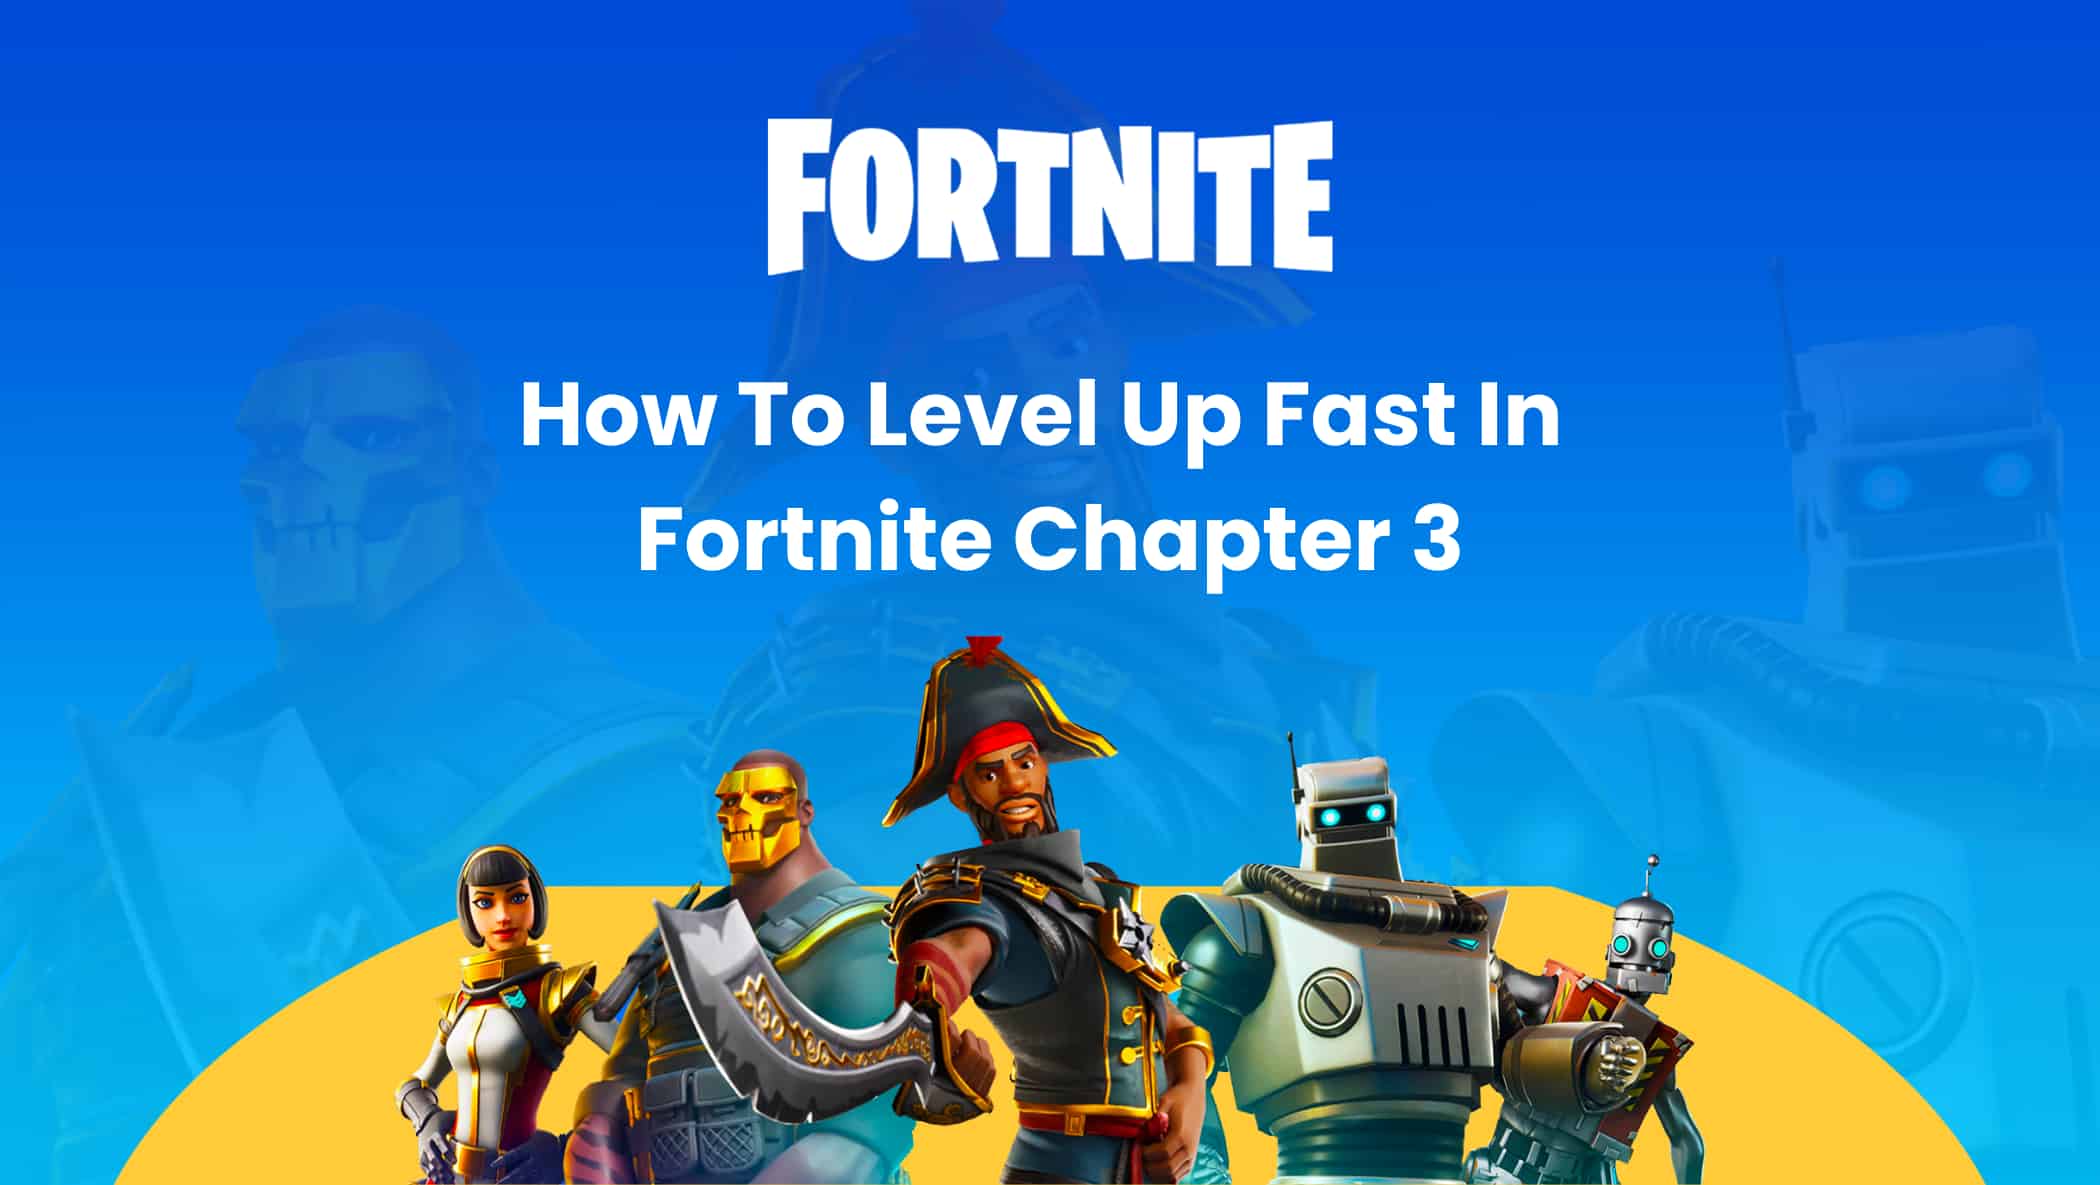 How To Level Up Fast In Fortnite Chapter 3